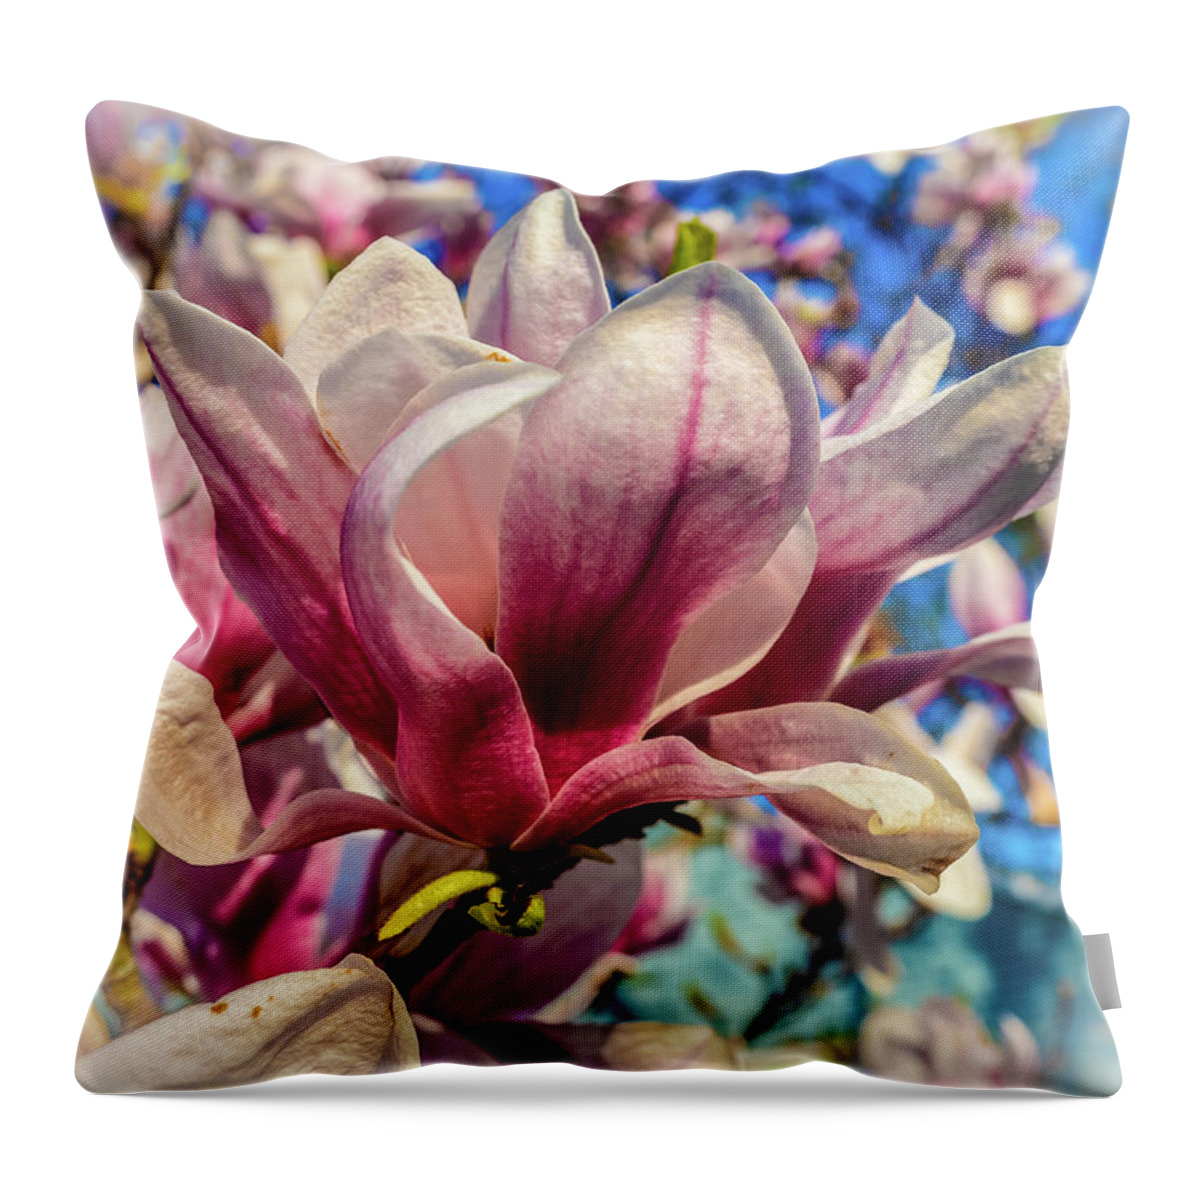 Flowers/plants Throw Pillow featuring the photograph Magnolia flowers by Louis Dallara